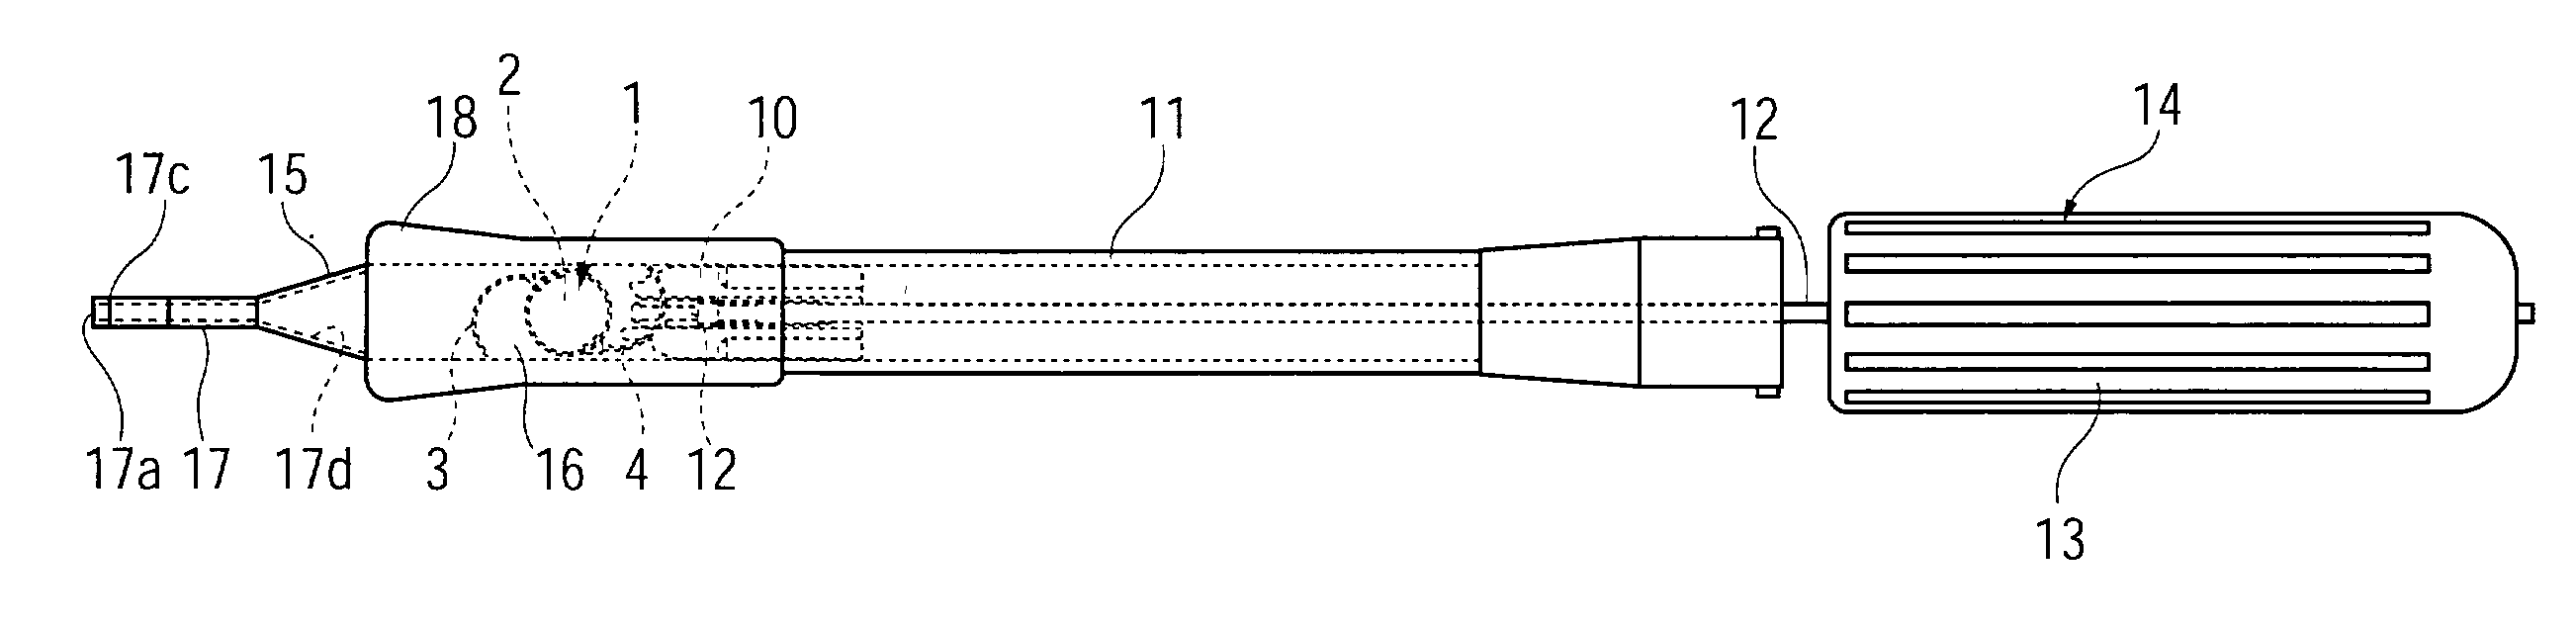 Insertion device for intraocular lens